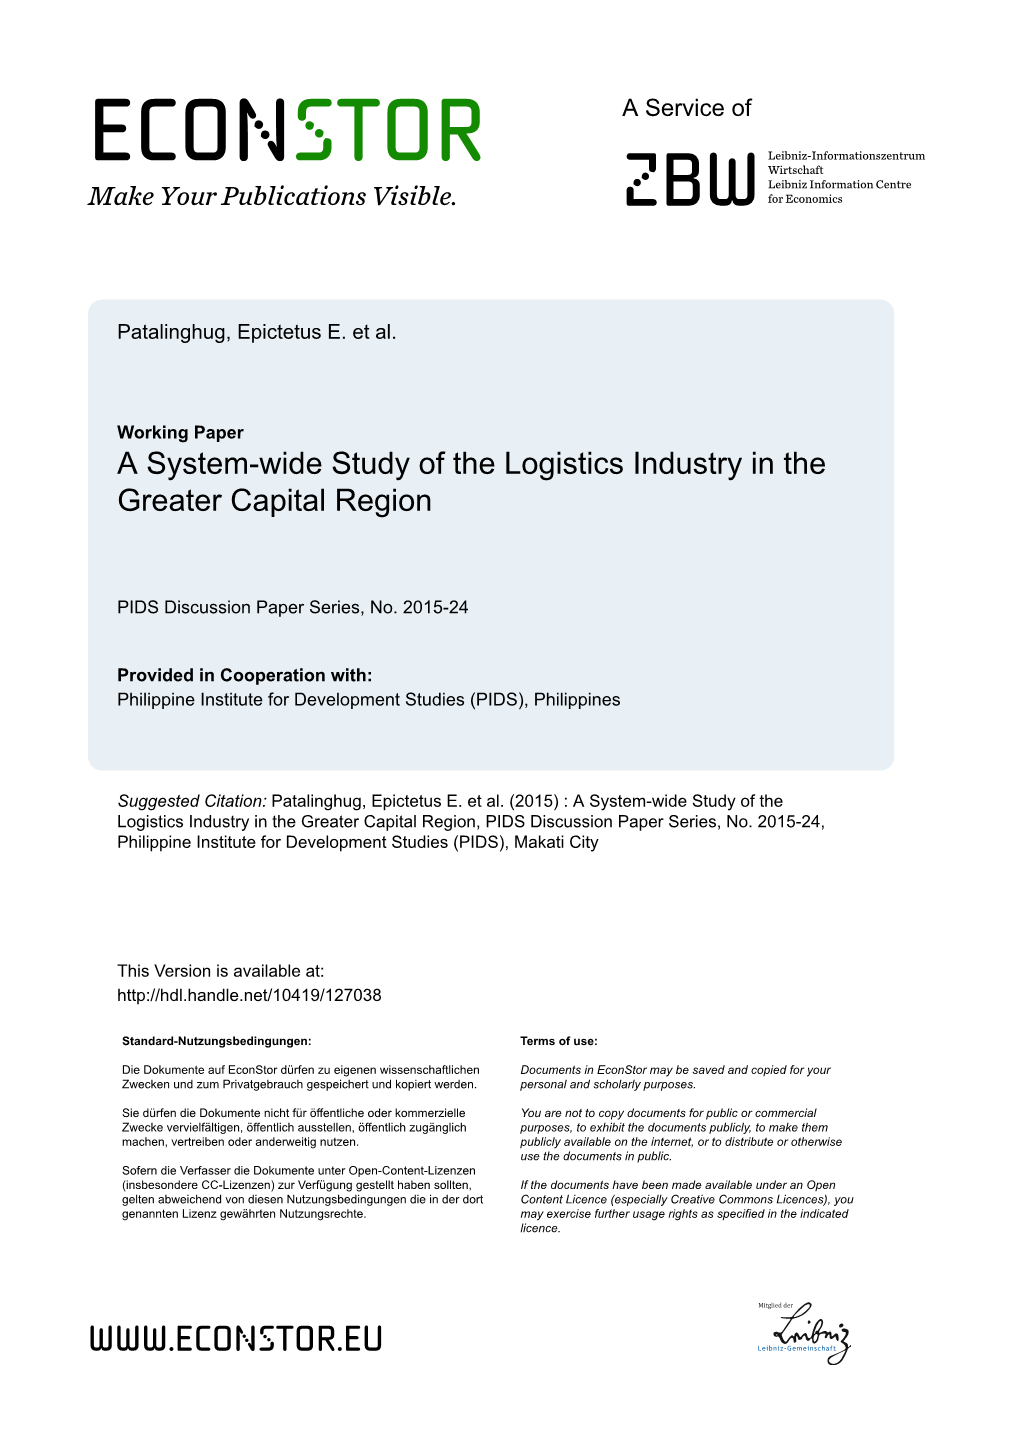 A System-Wide Study of the Logistics Industry in the Greater Capital Region